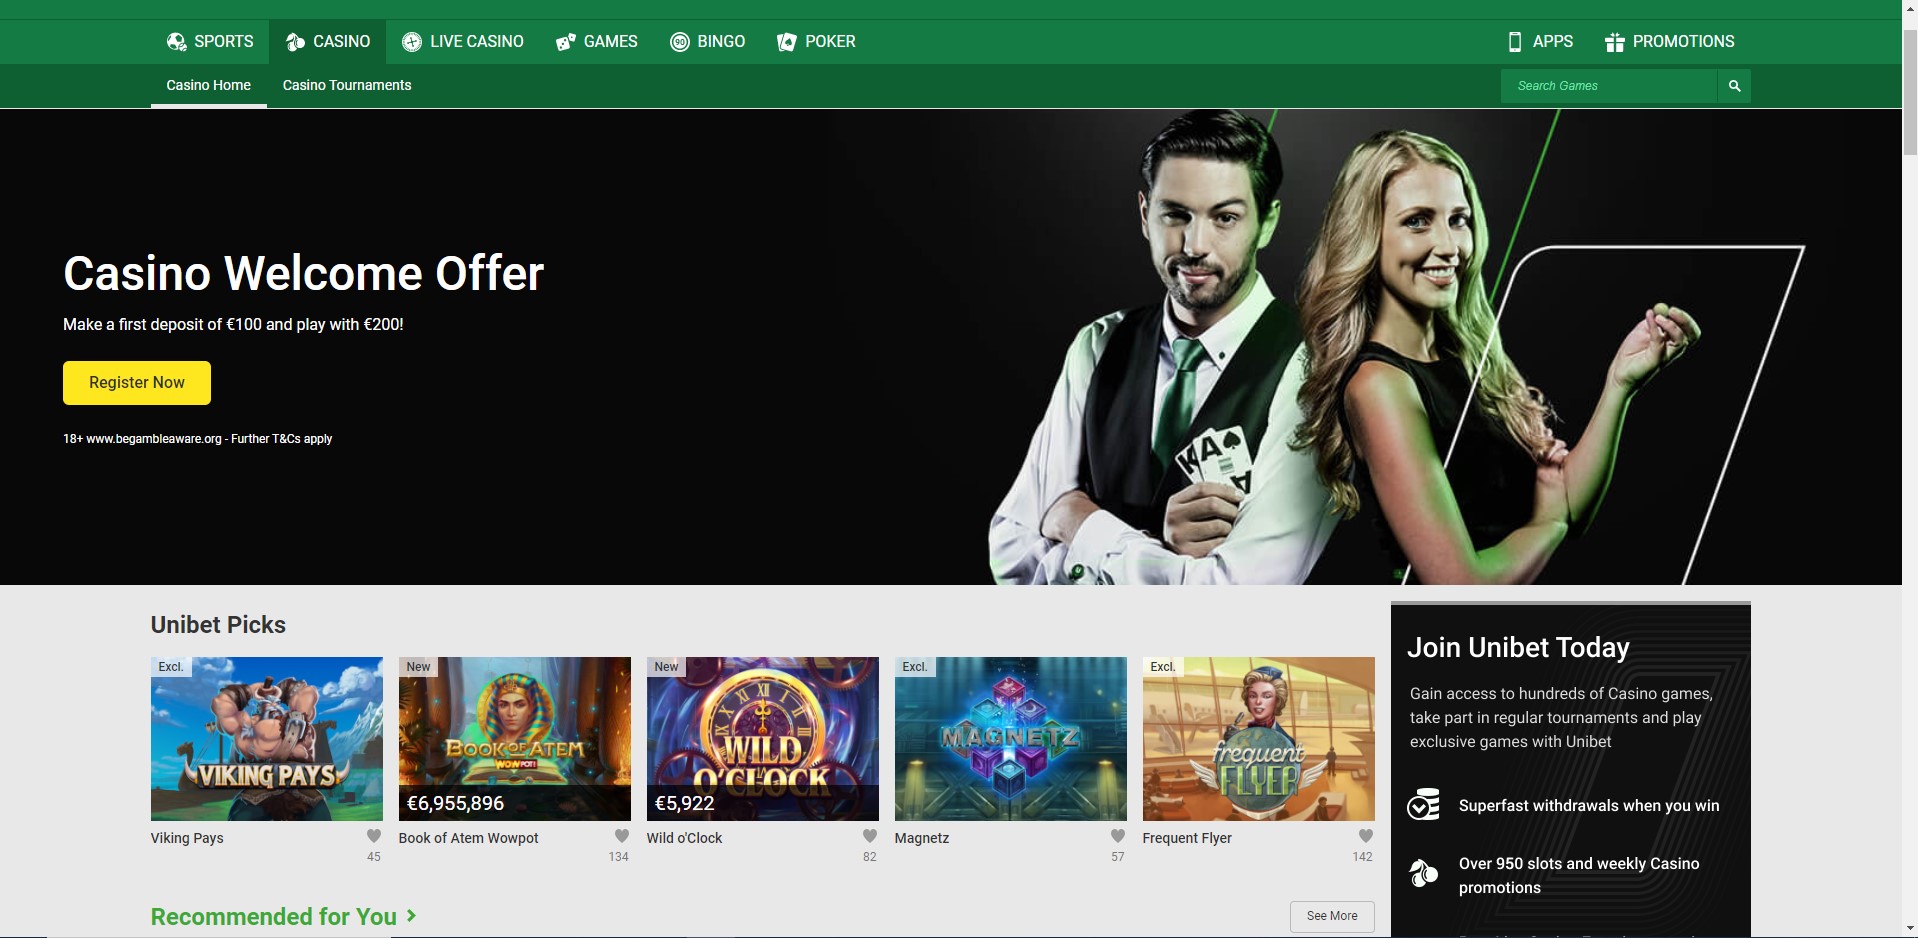 Unibet: The Casino Site That Offers The Most Excitement For Indian Players